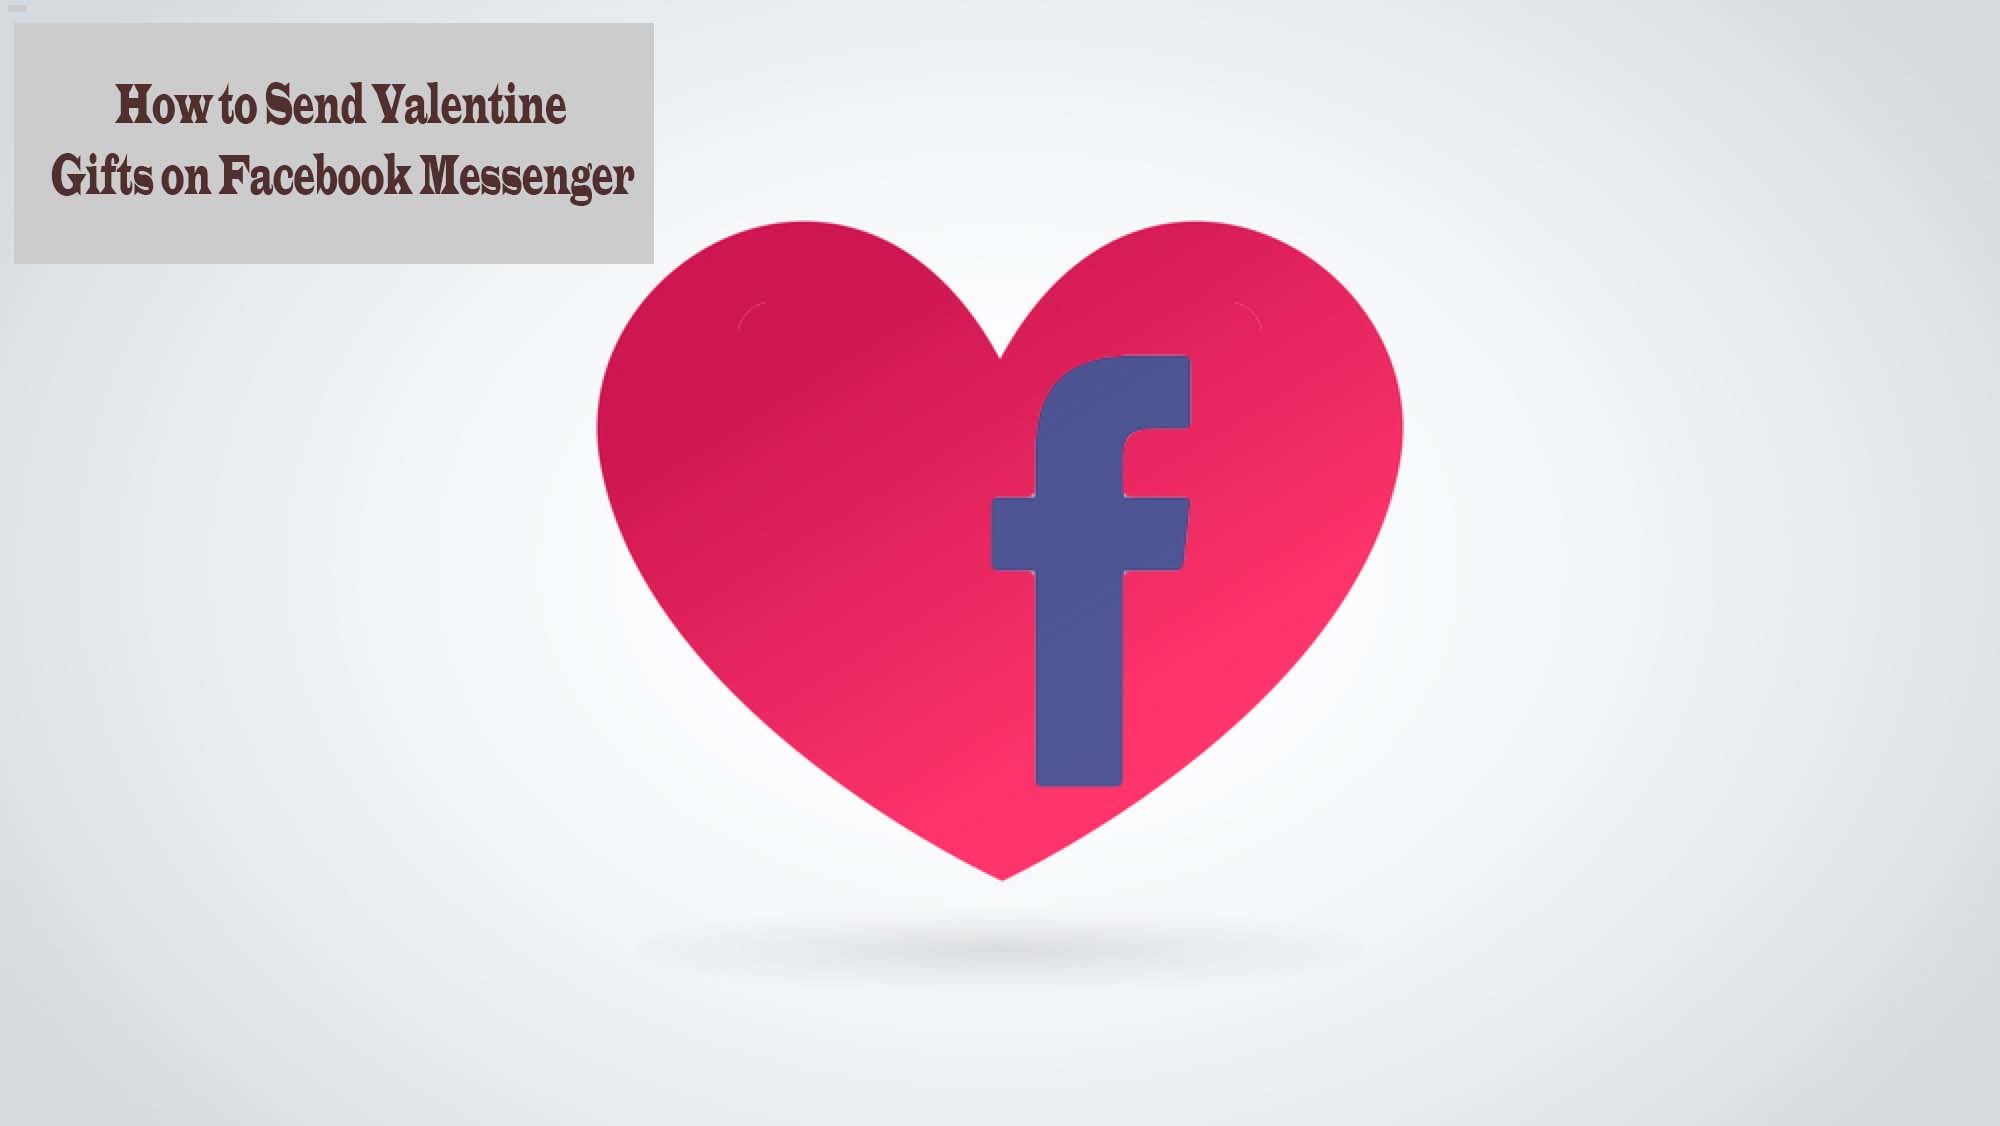 How to Send Valentine Gifts on Facebook Messenger